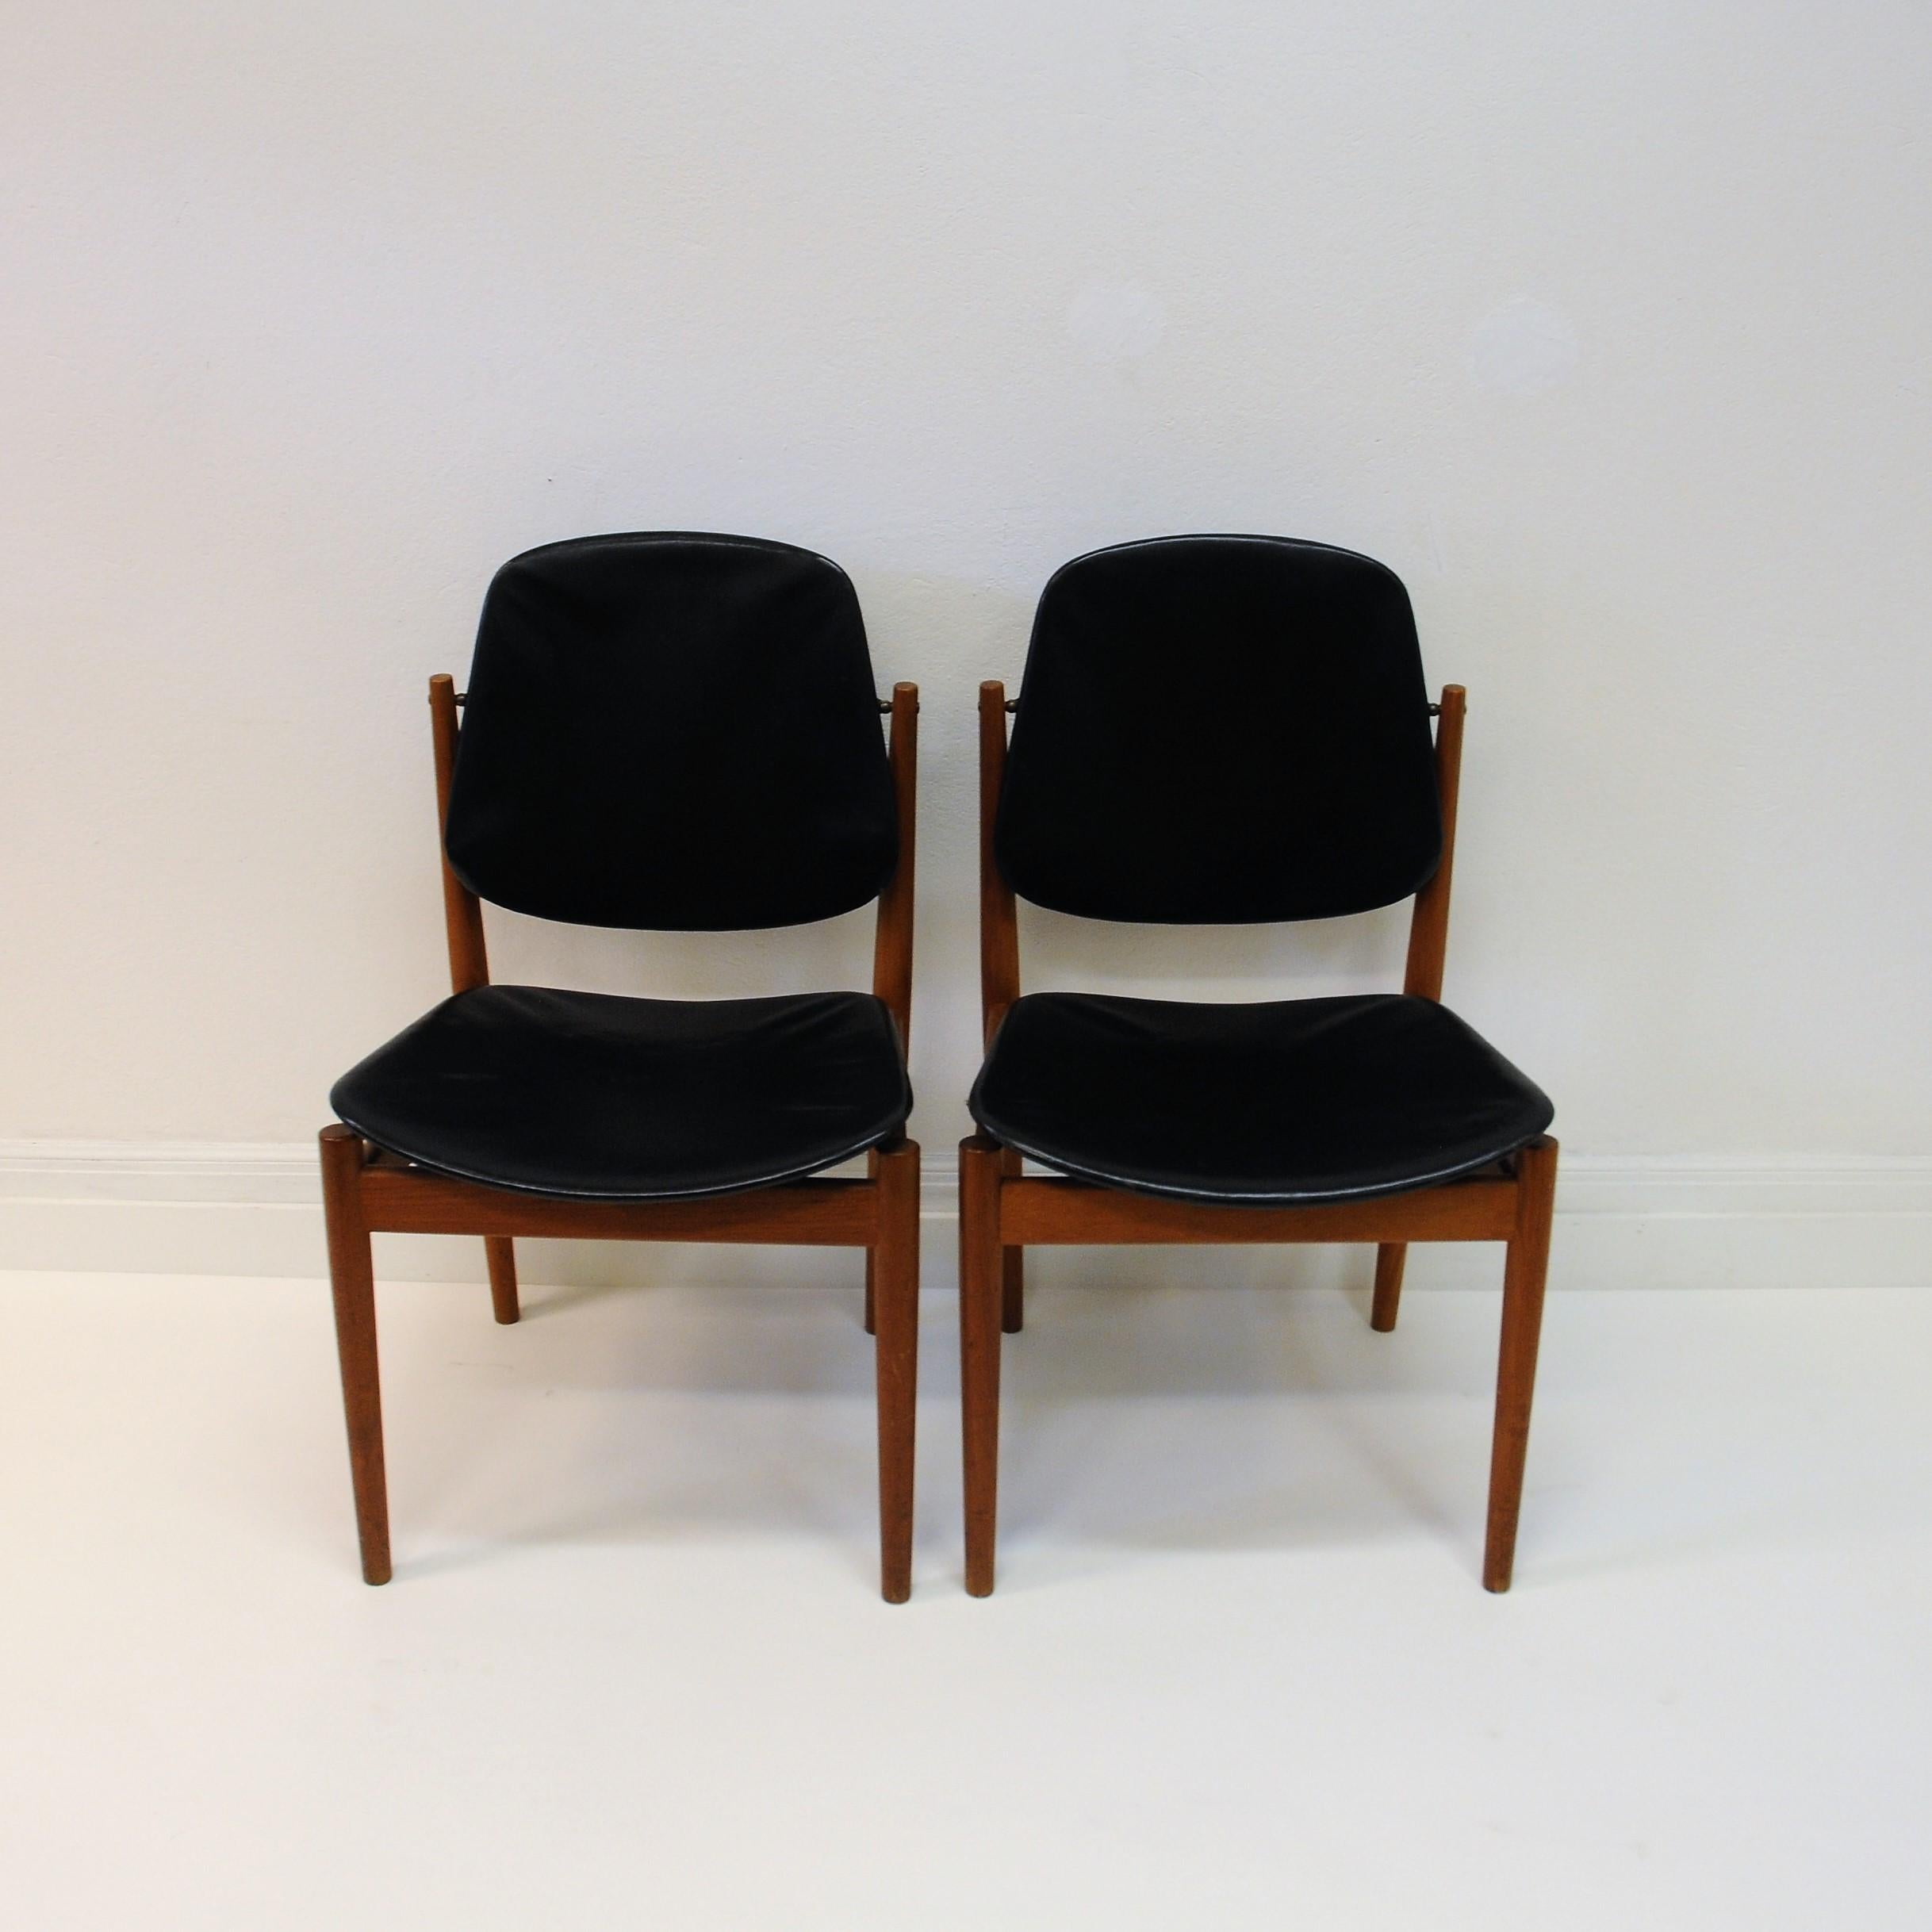 Mid-Century Modern Danish pair of  Diningchairs by Arne Vodder in teak and black leather, 1950s